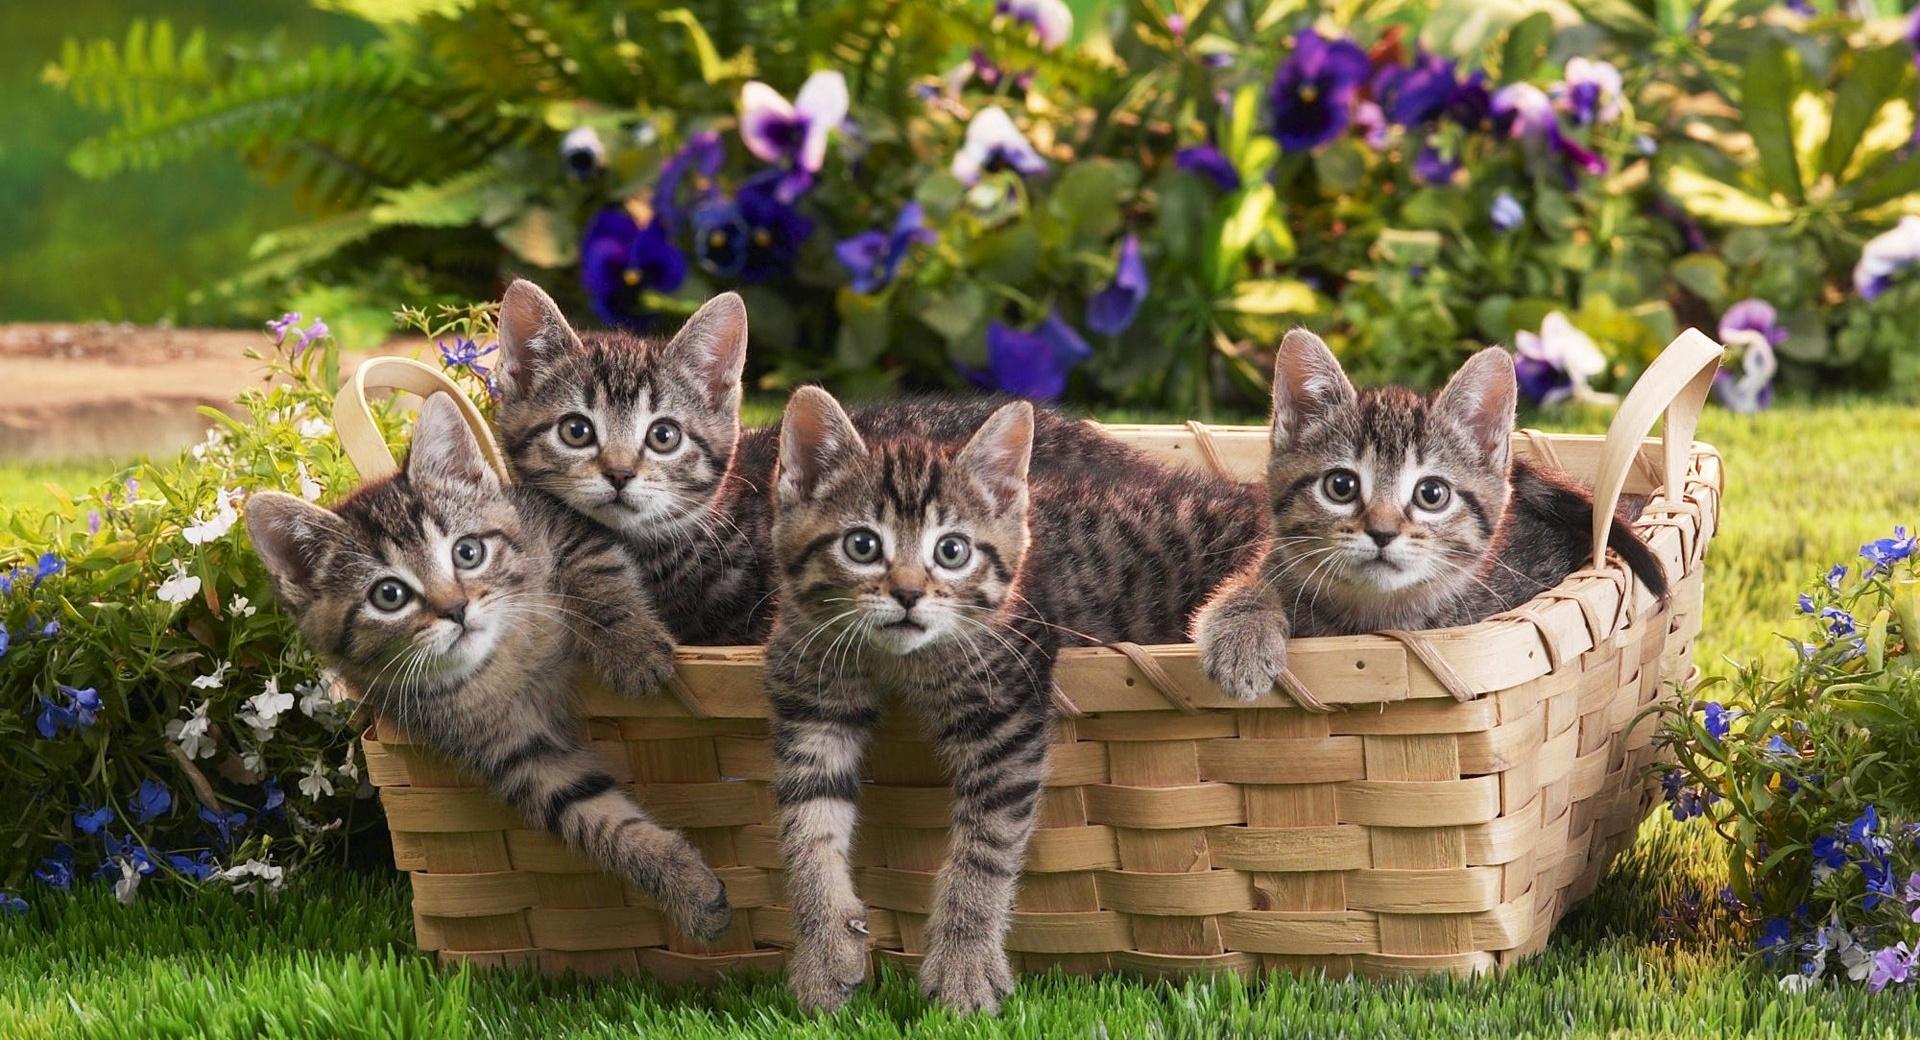 Kittens In Basket wallpapers HD quality